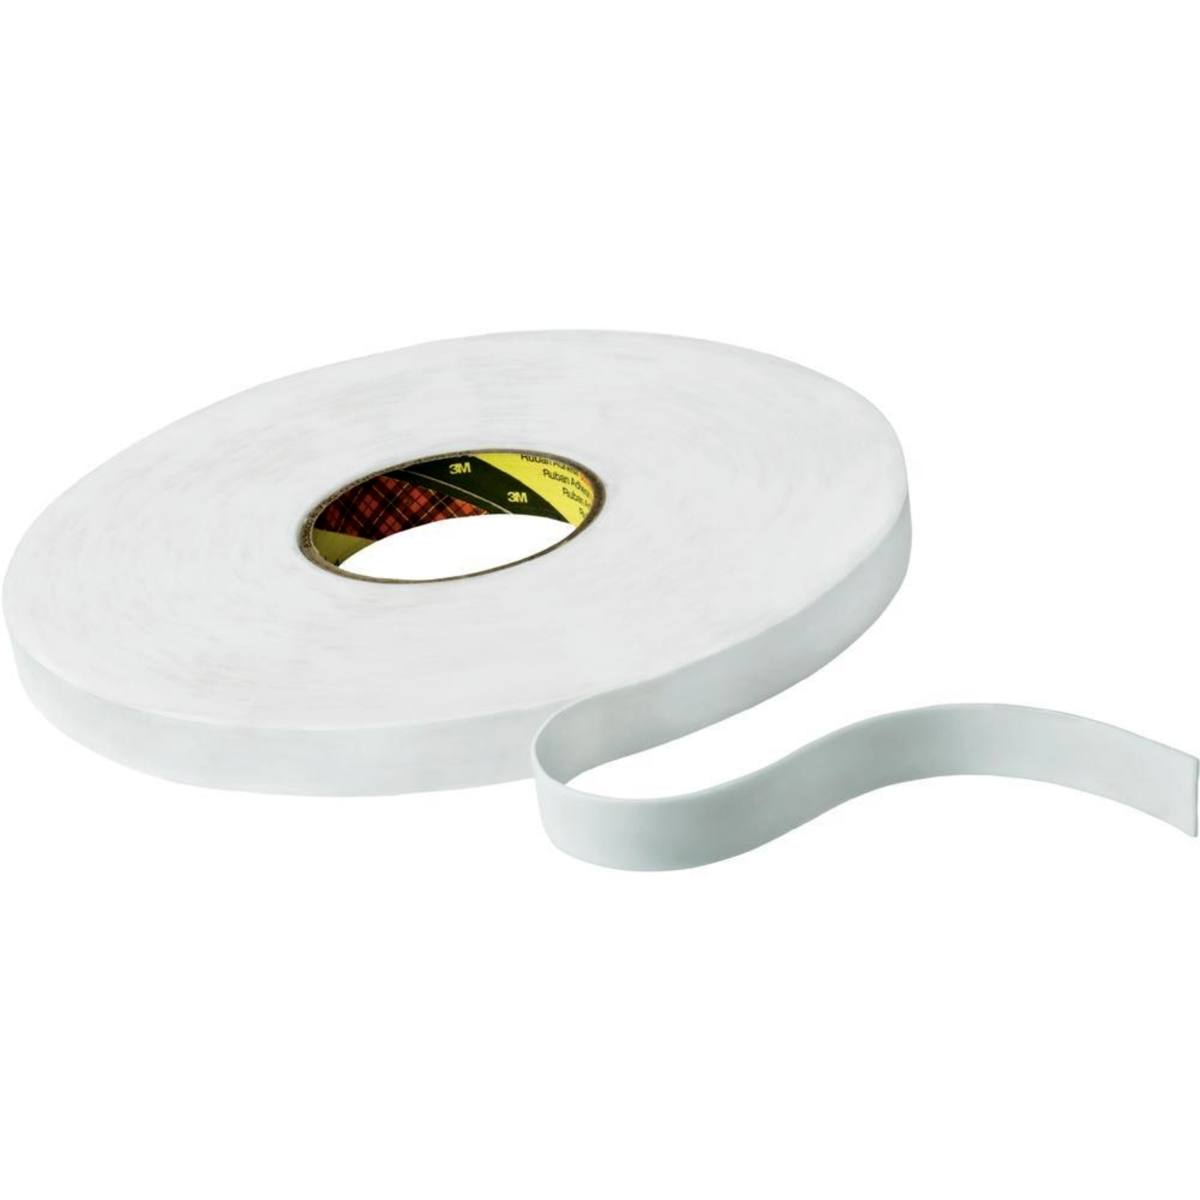 3M PE foam adhesive tape with rubber-resin adhesive 9528, white, 12 mm x 66 m, 0.8 mm